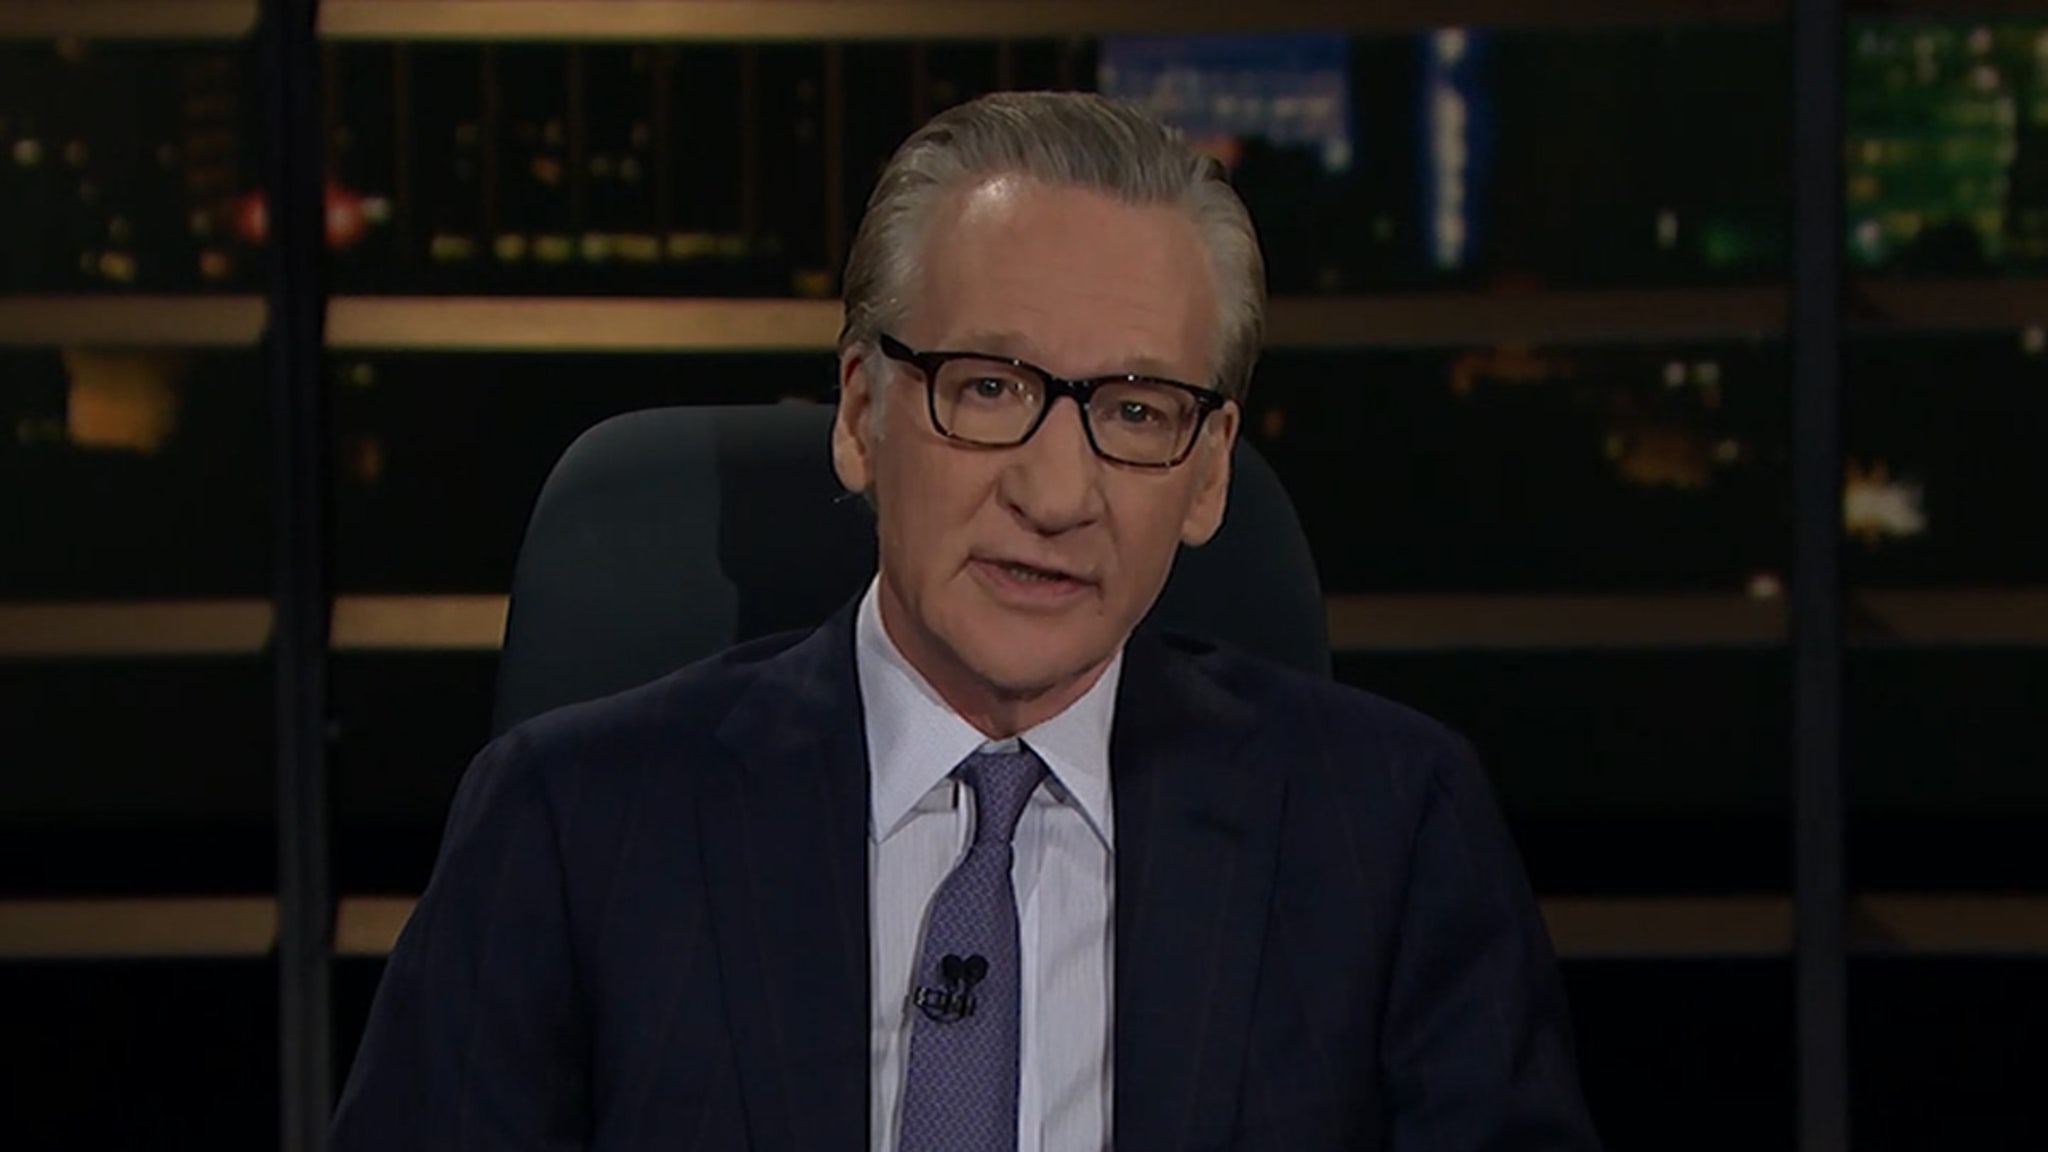 Bill Maher Says Americans are Now So Tribal We’ve Lost Our Ability to Mingle